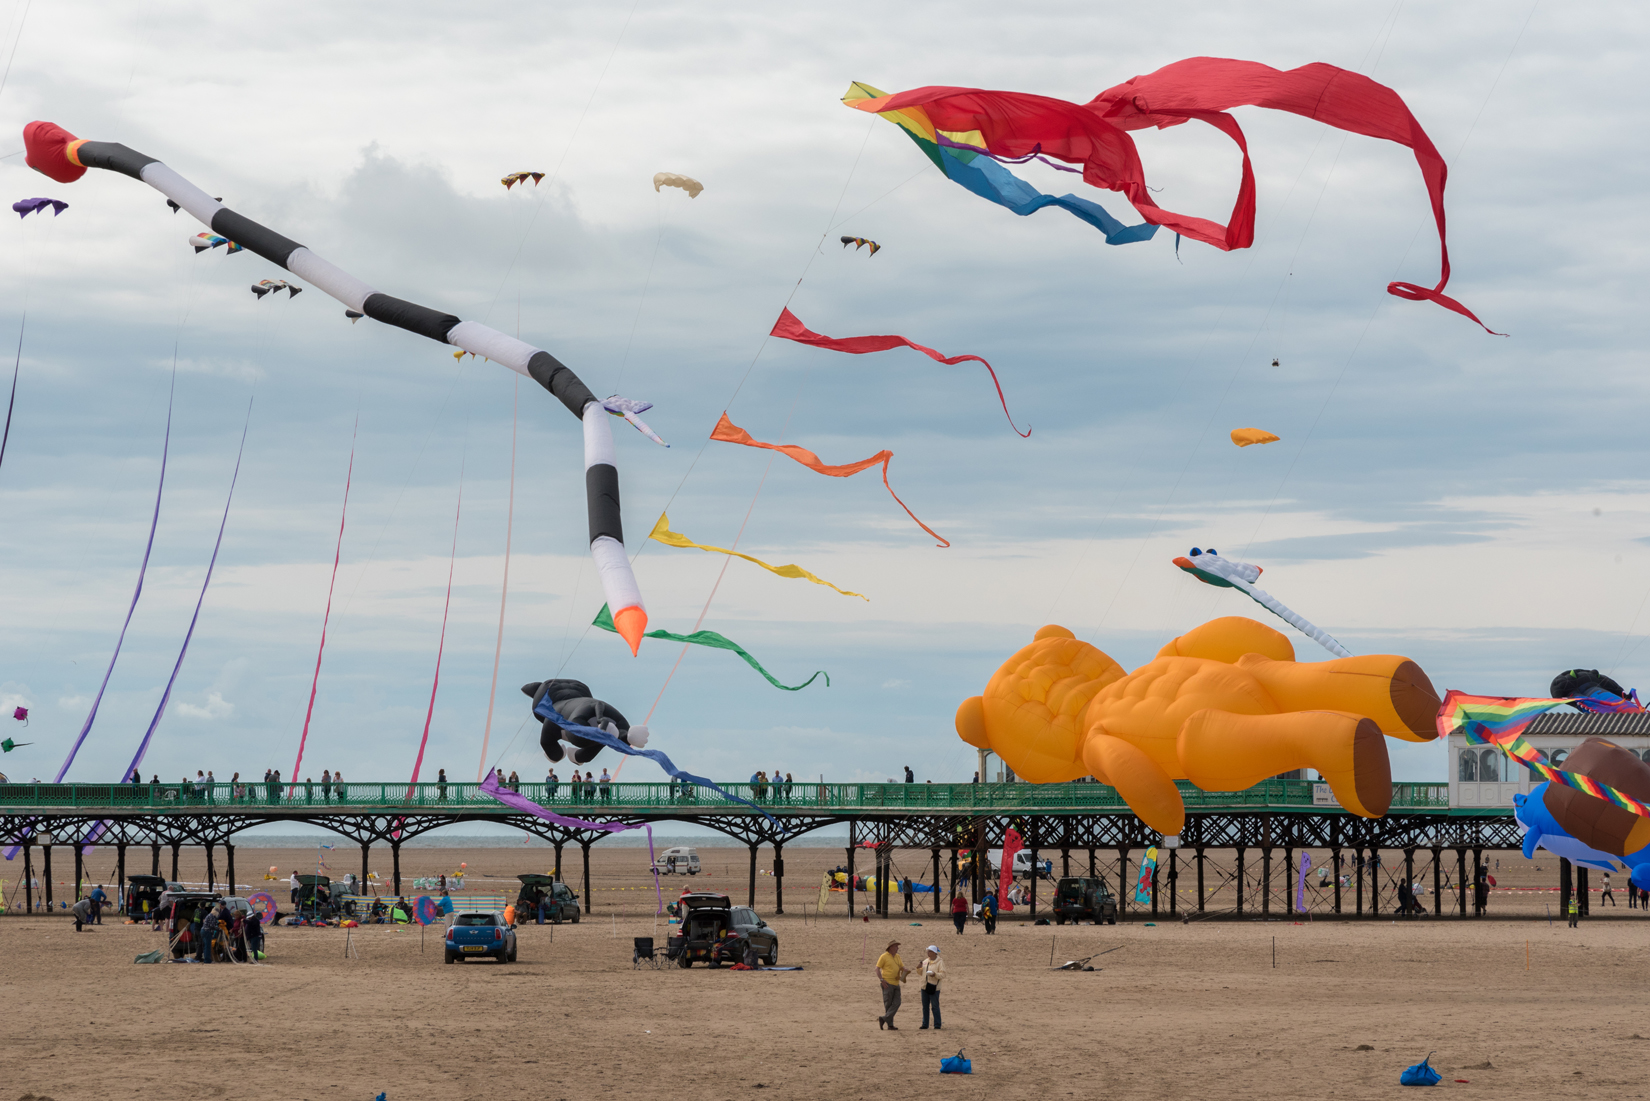 Some of the collection of kites in flight.